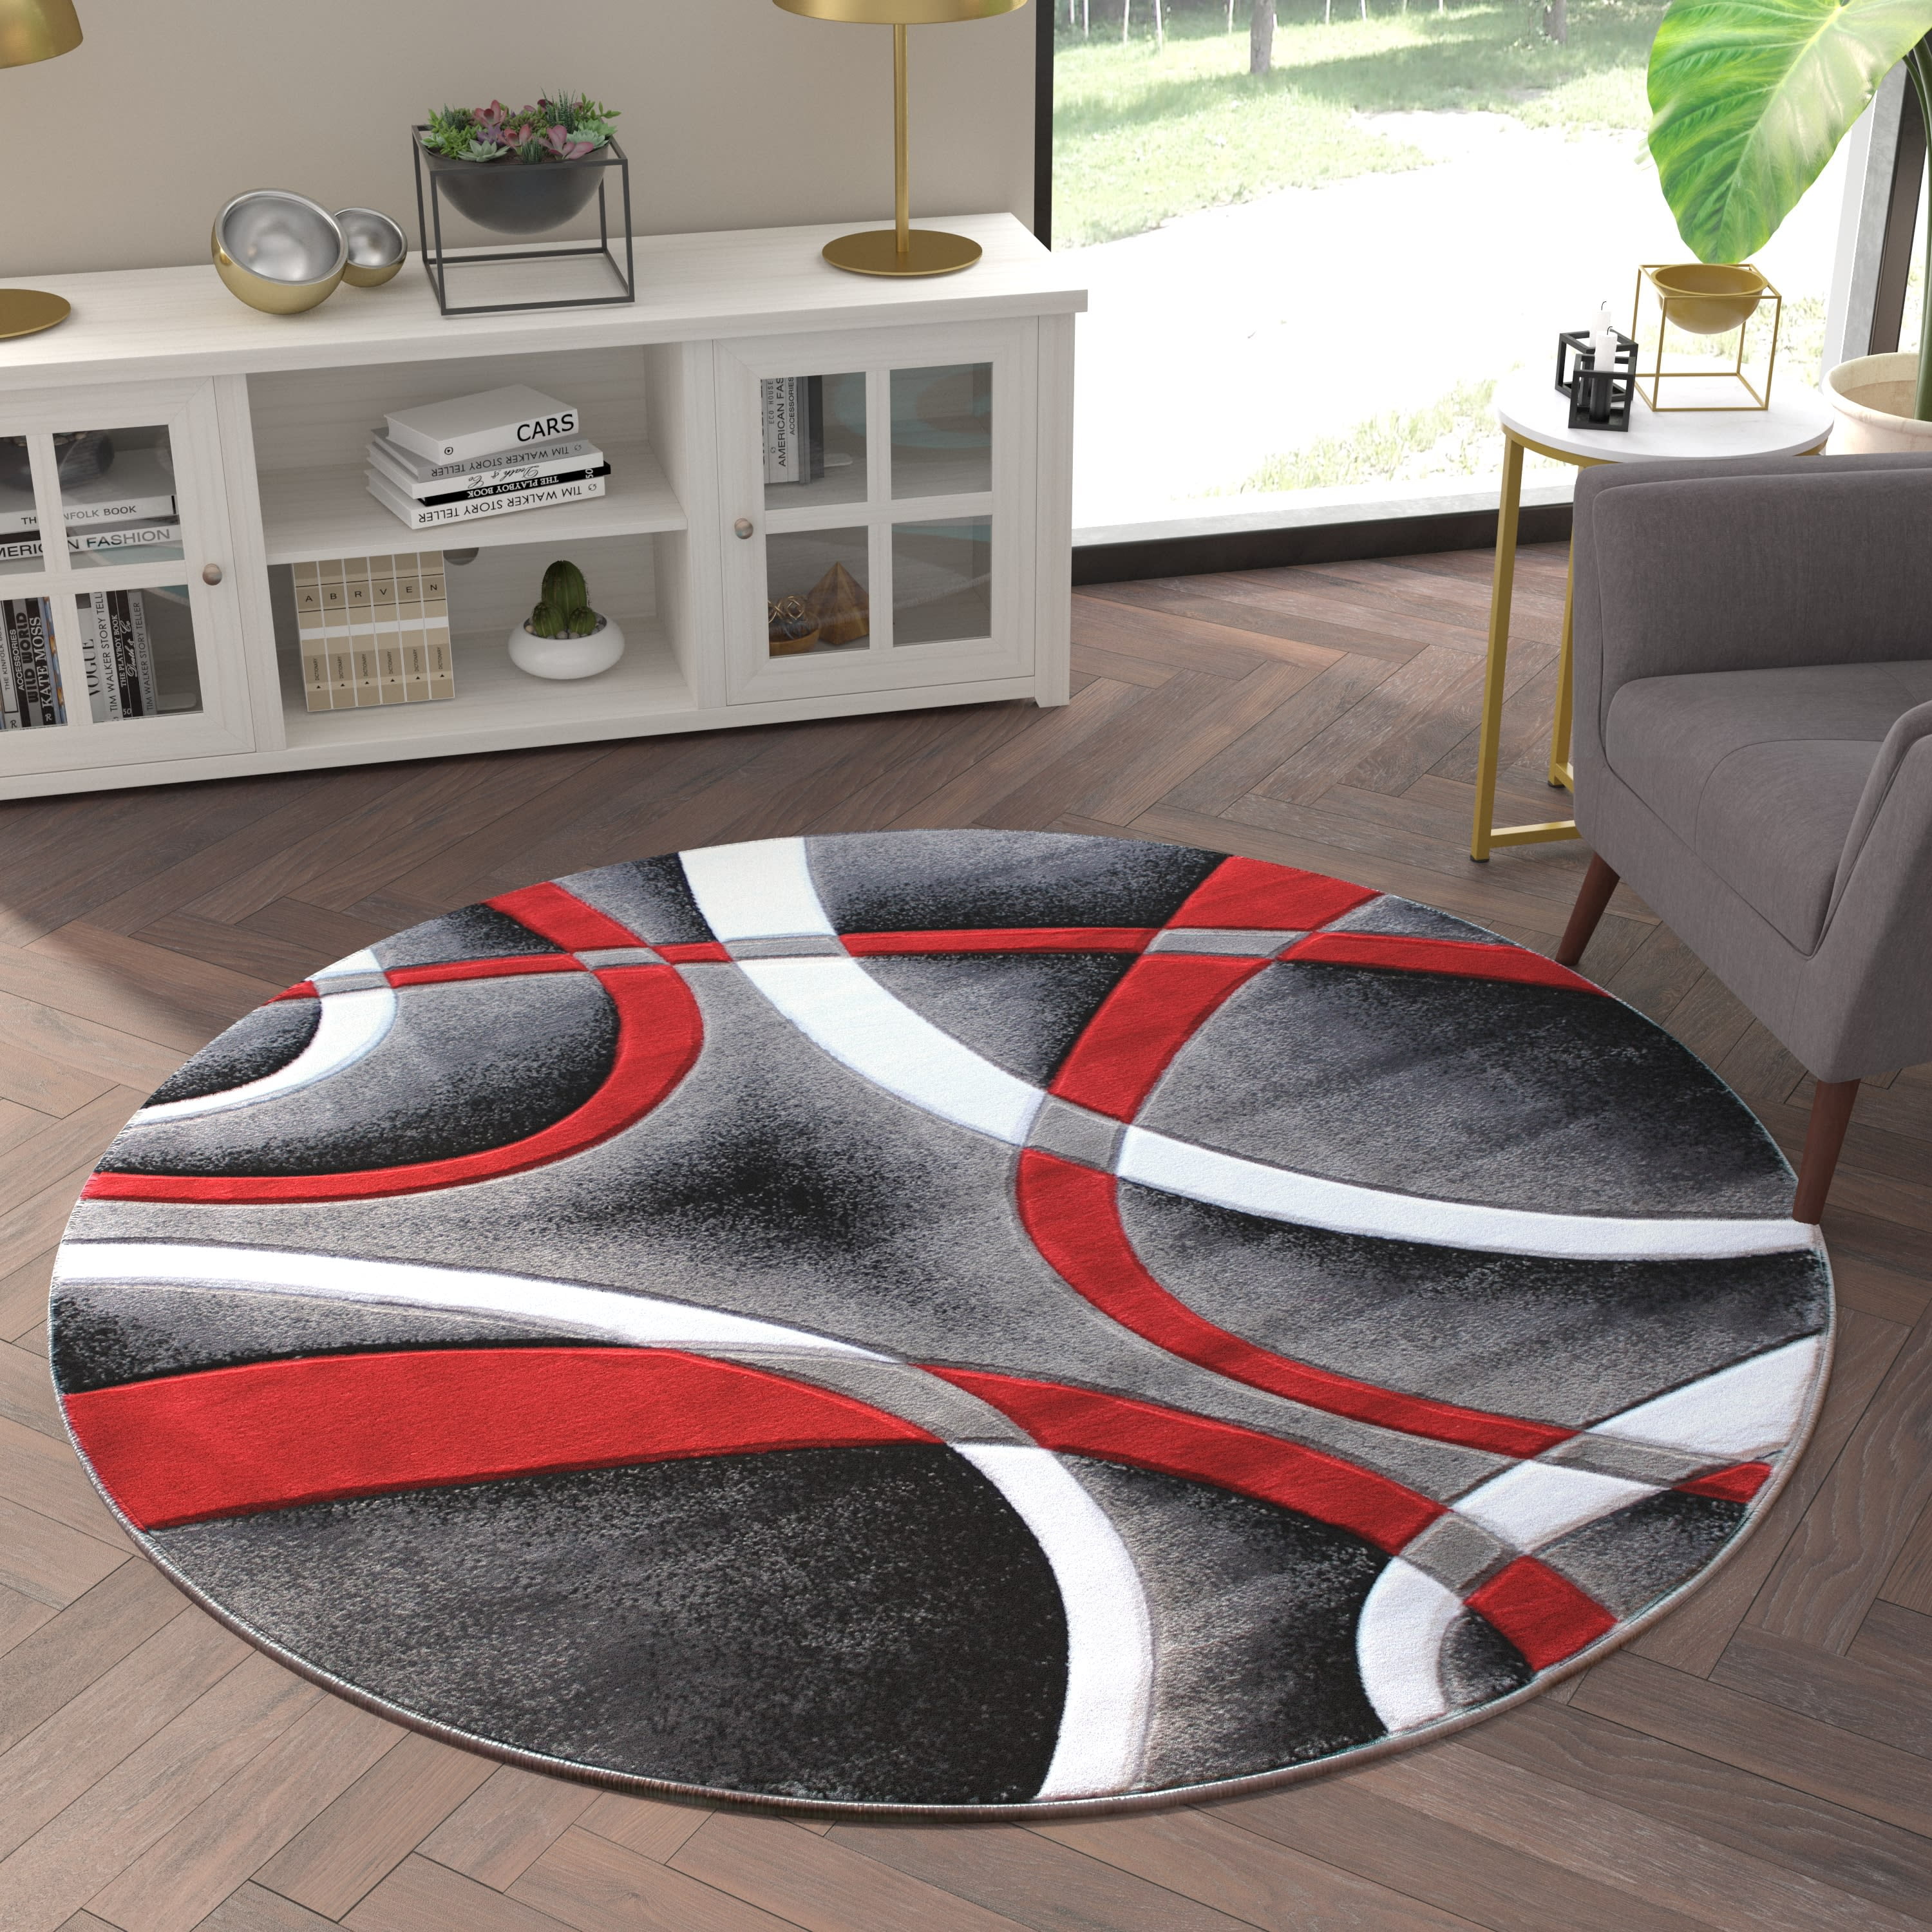 Emma + Oliver 5x5 Round Olefin Accent Rug with 3D Sculpted Intersecting  Arch Design in Red, Gray, Black and White with Jute Backing 